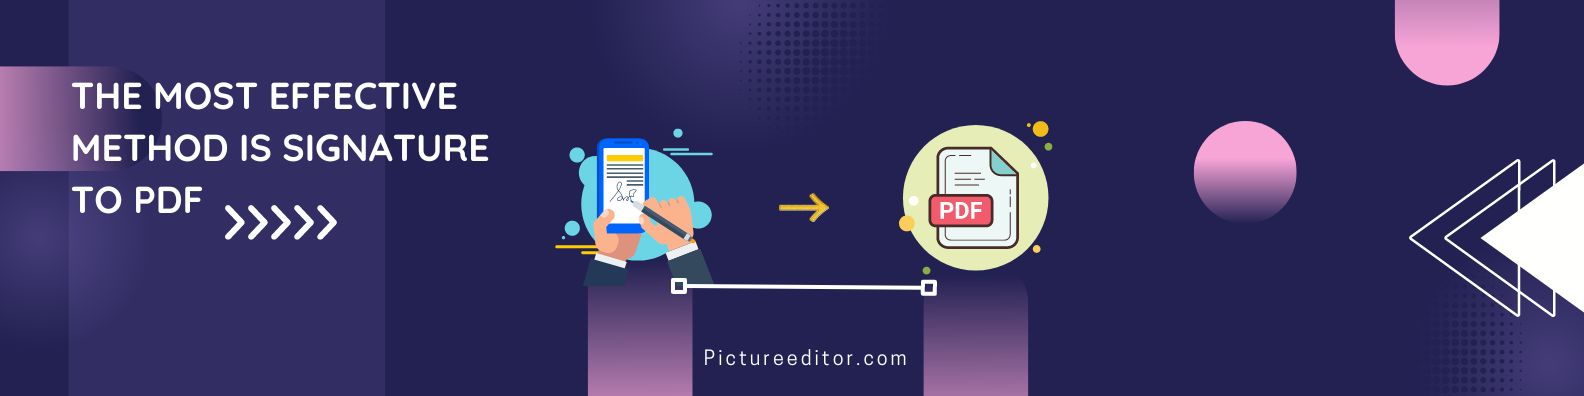 The most effective method is Signature to PDF